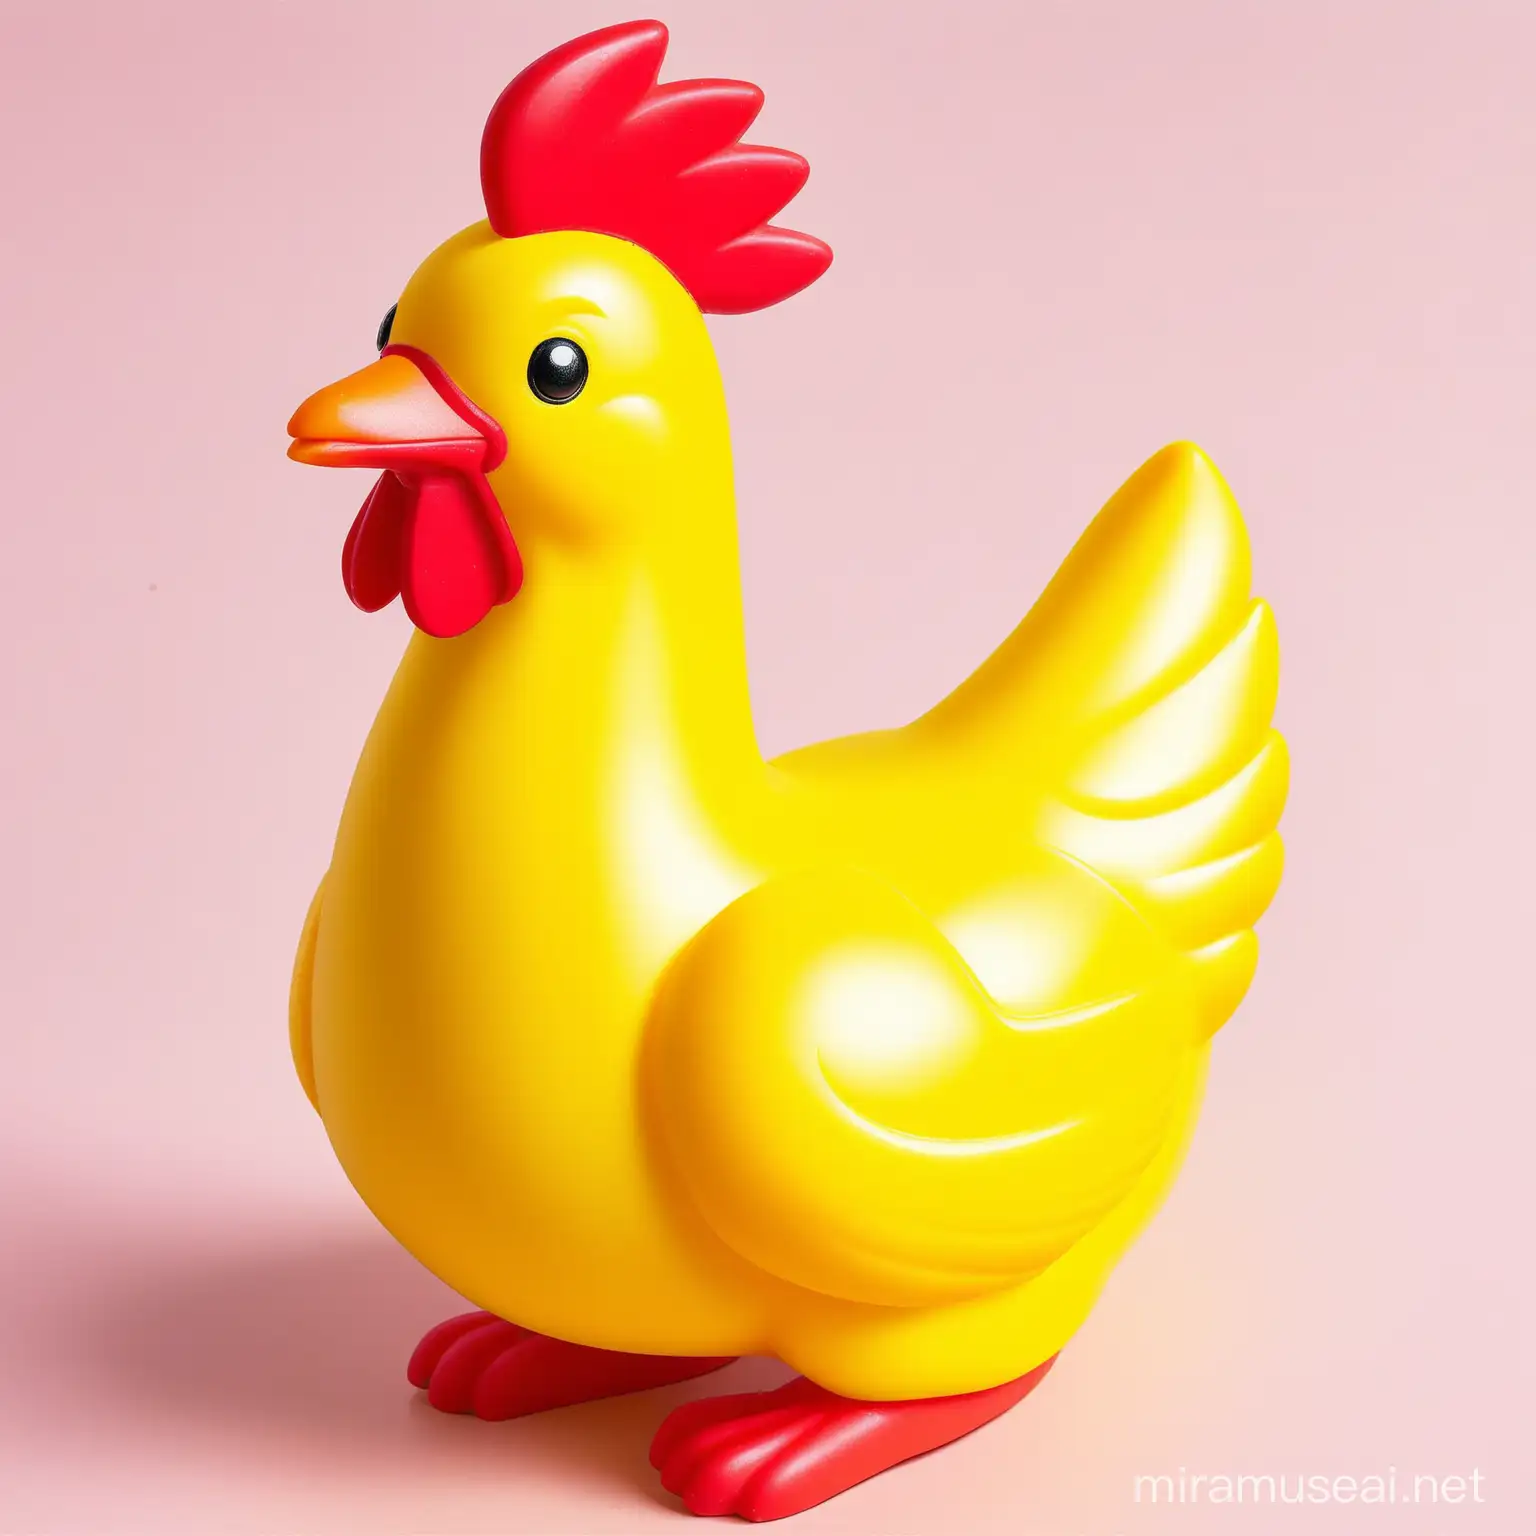 Playful Rubber Chicken Toy with Vibrant Colors and Comical Expression